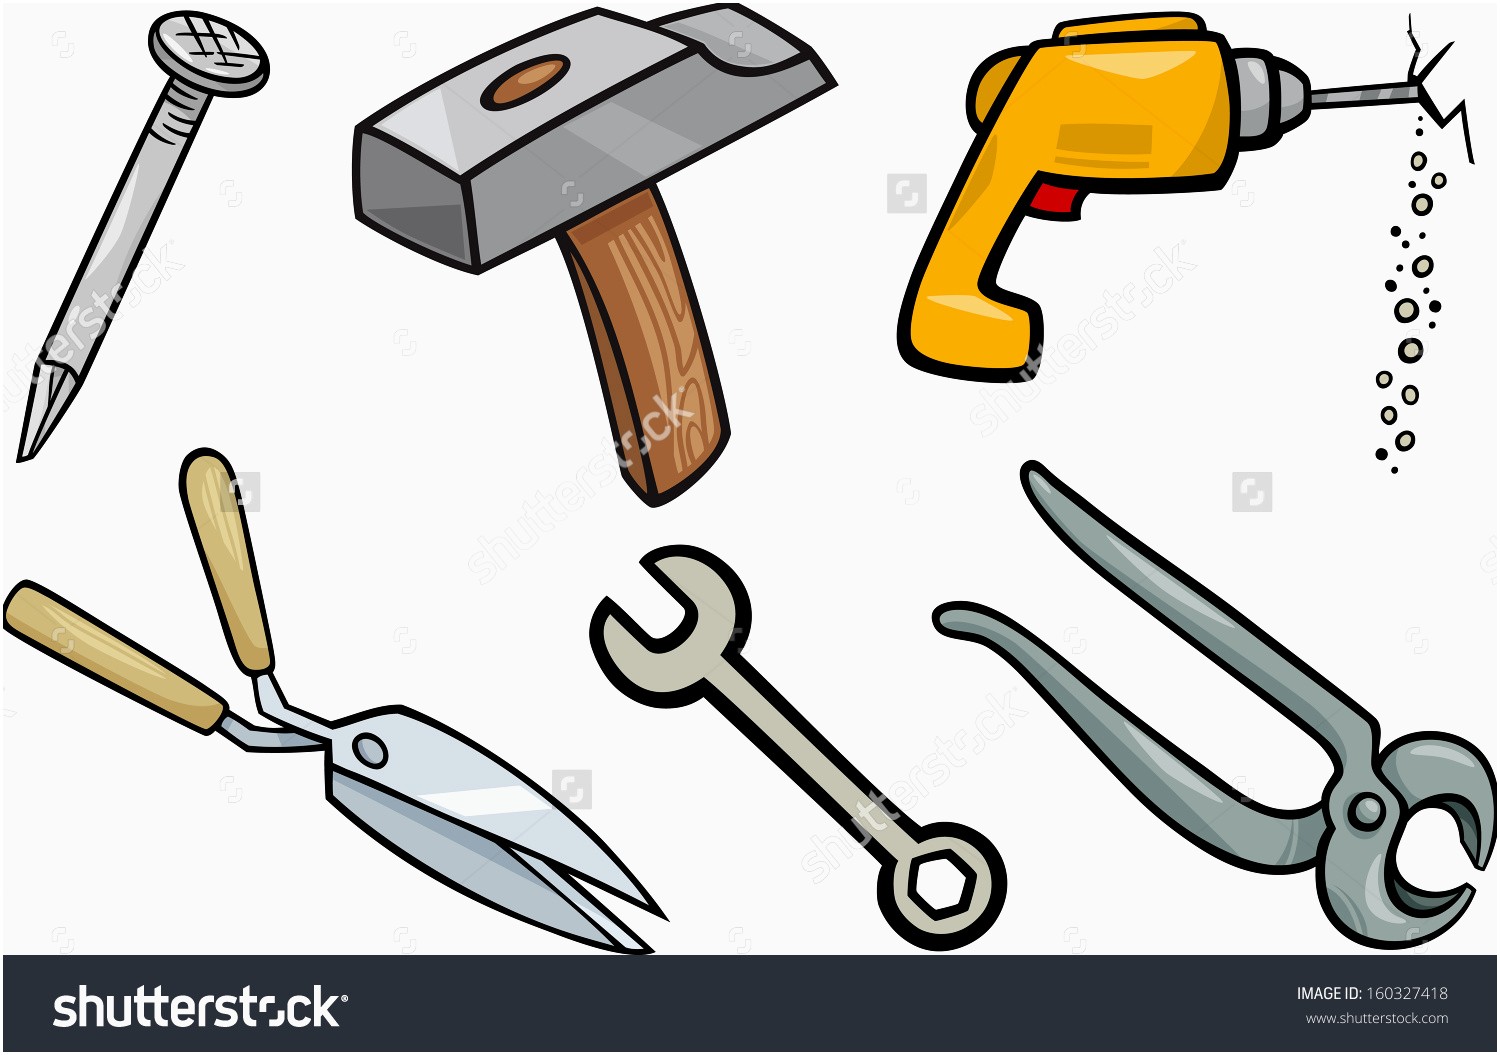 Woodworking Tools Clipart Lovely woodworking tools clipart.